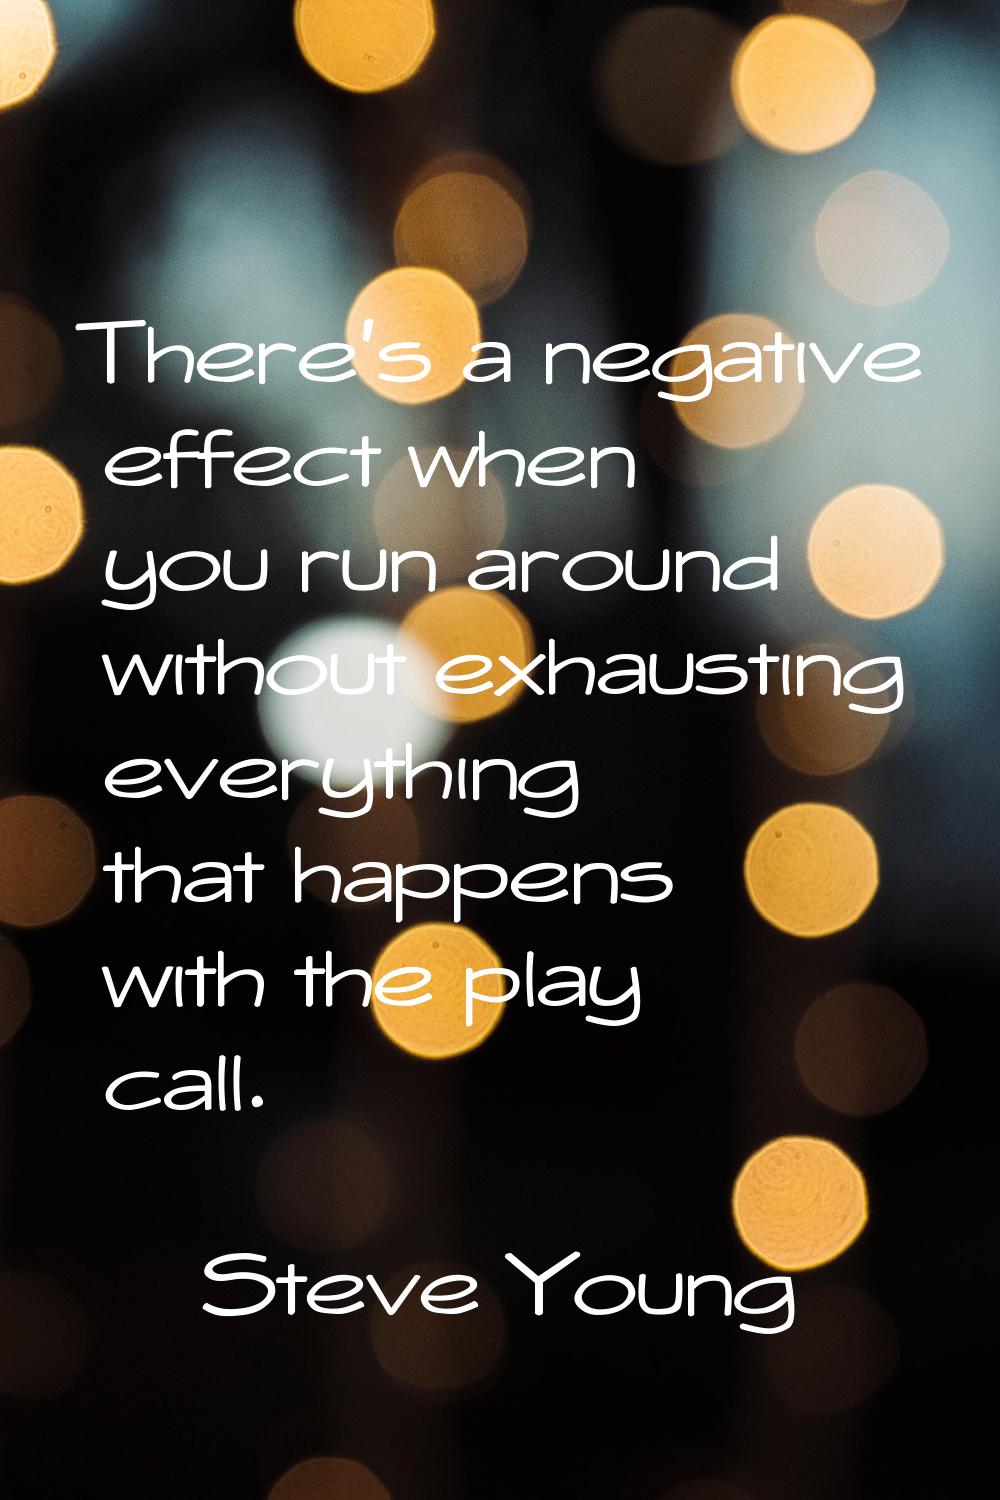 There's a negative effect when you run around without exhausting everything that happens with the p